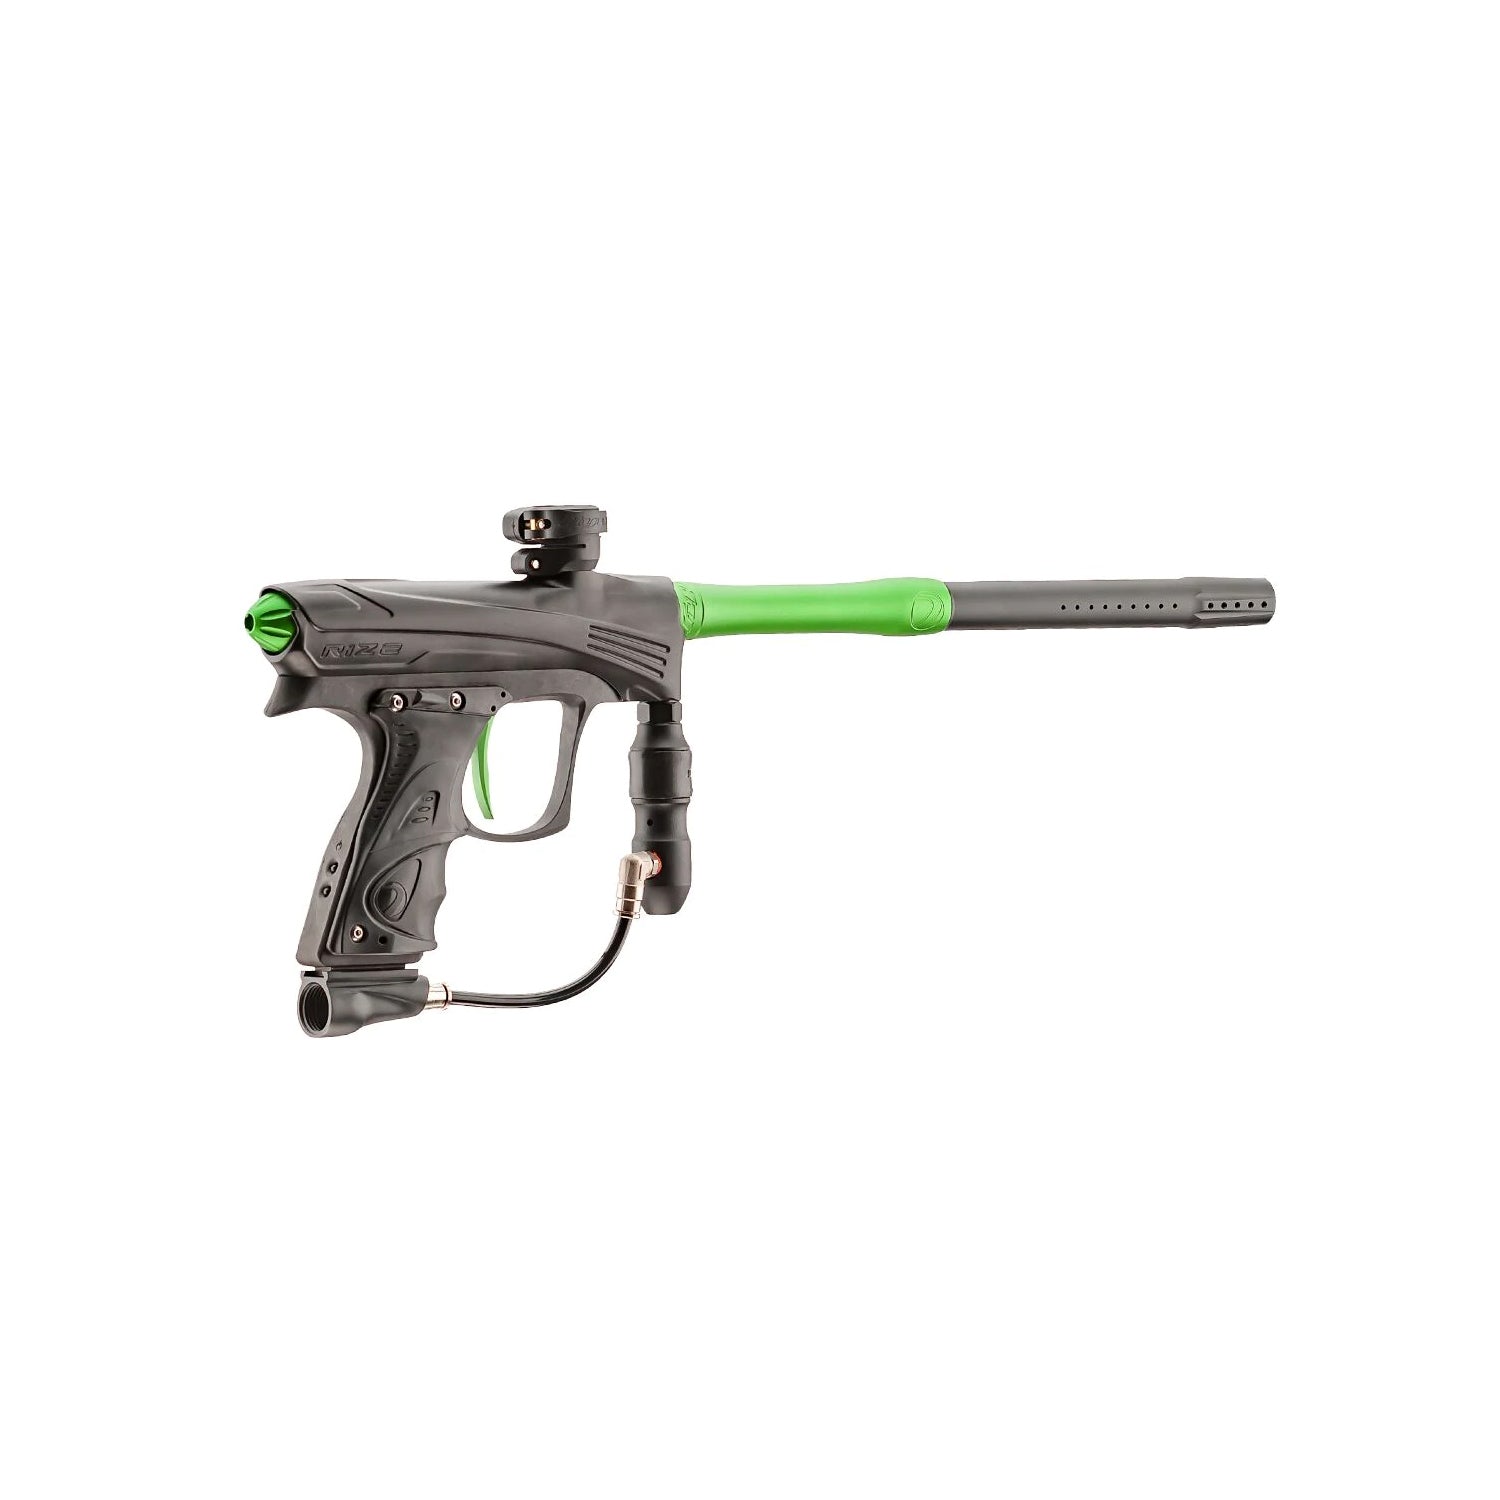 Dye Rize CZR - Black with Lime